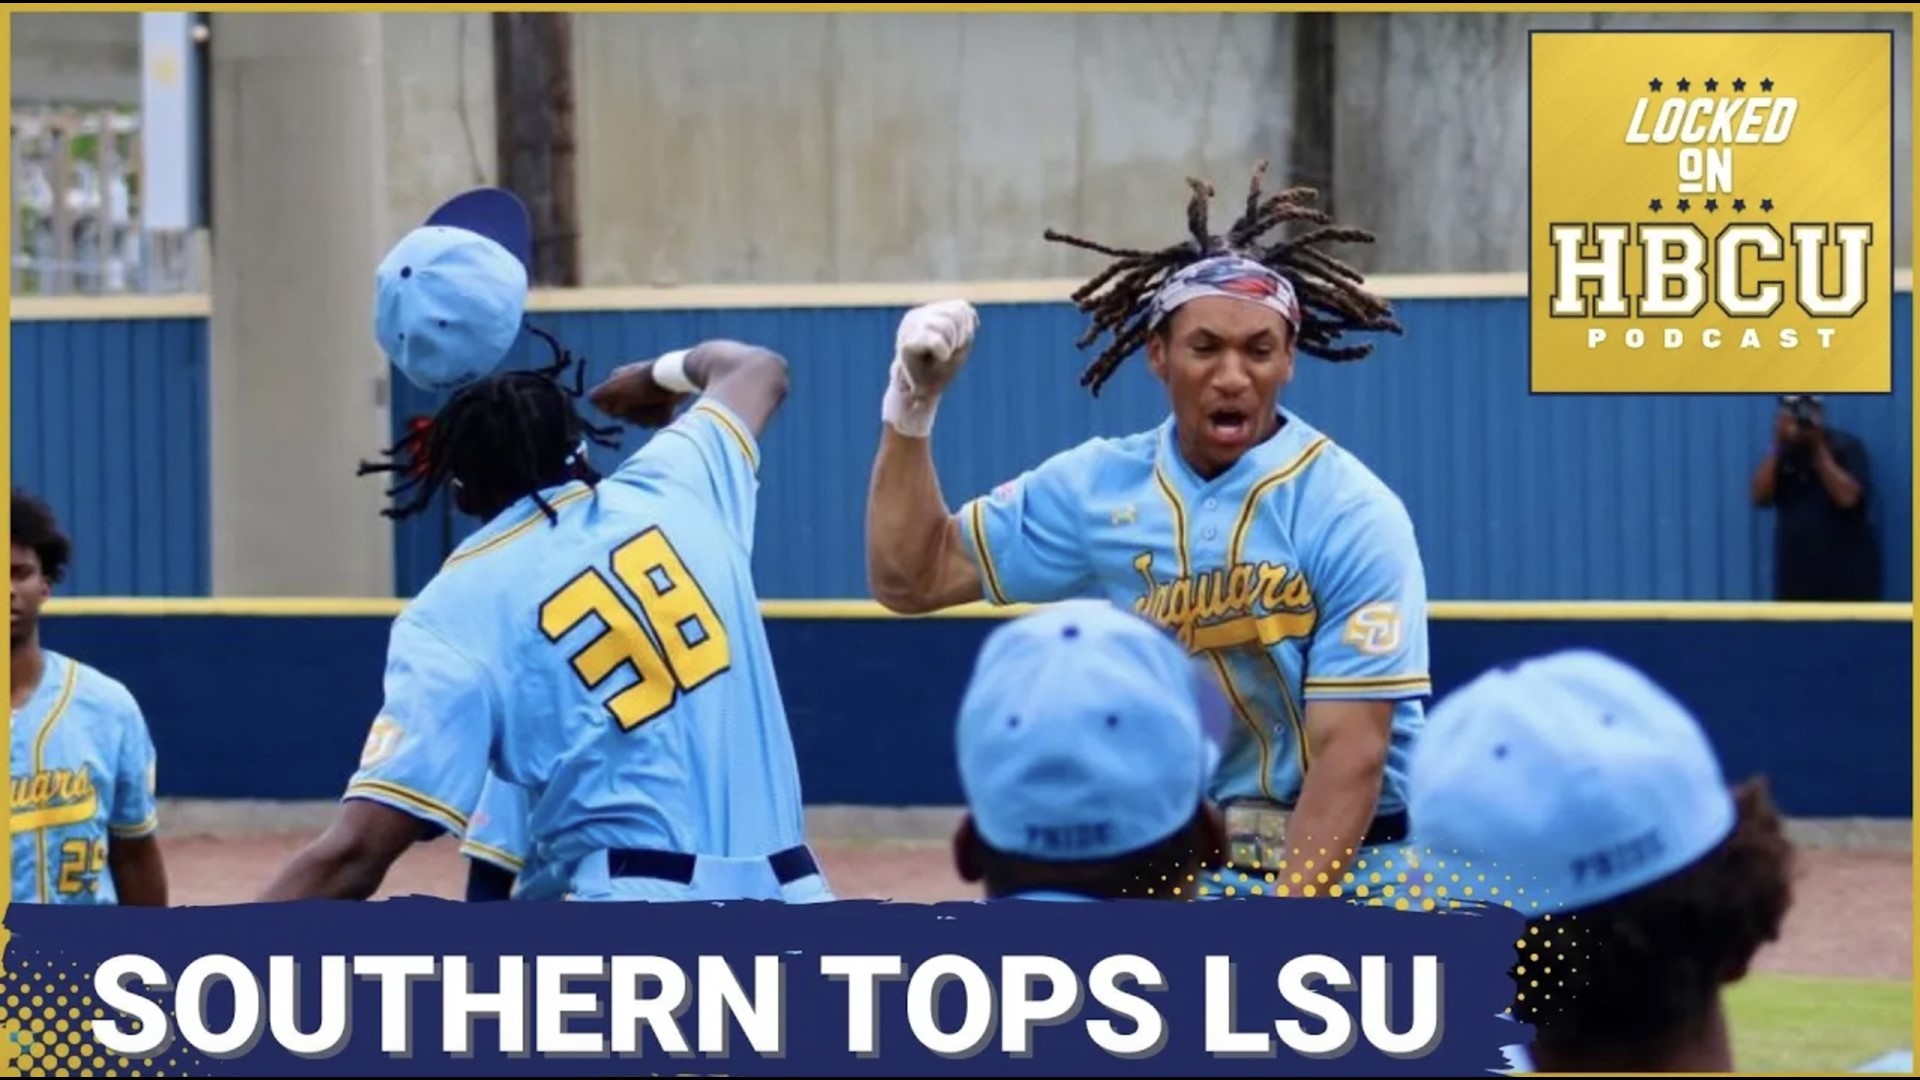 Southern vs LSU. Southern University baseball defeated LSU & has won 8/9 games with strong batting during the stretch.